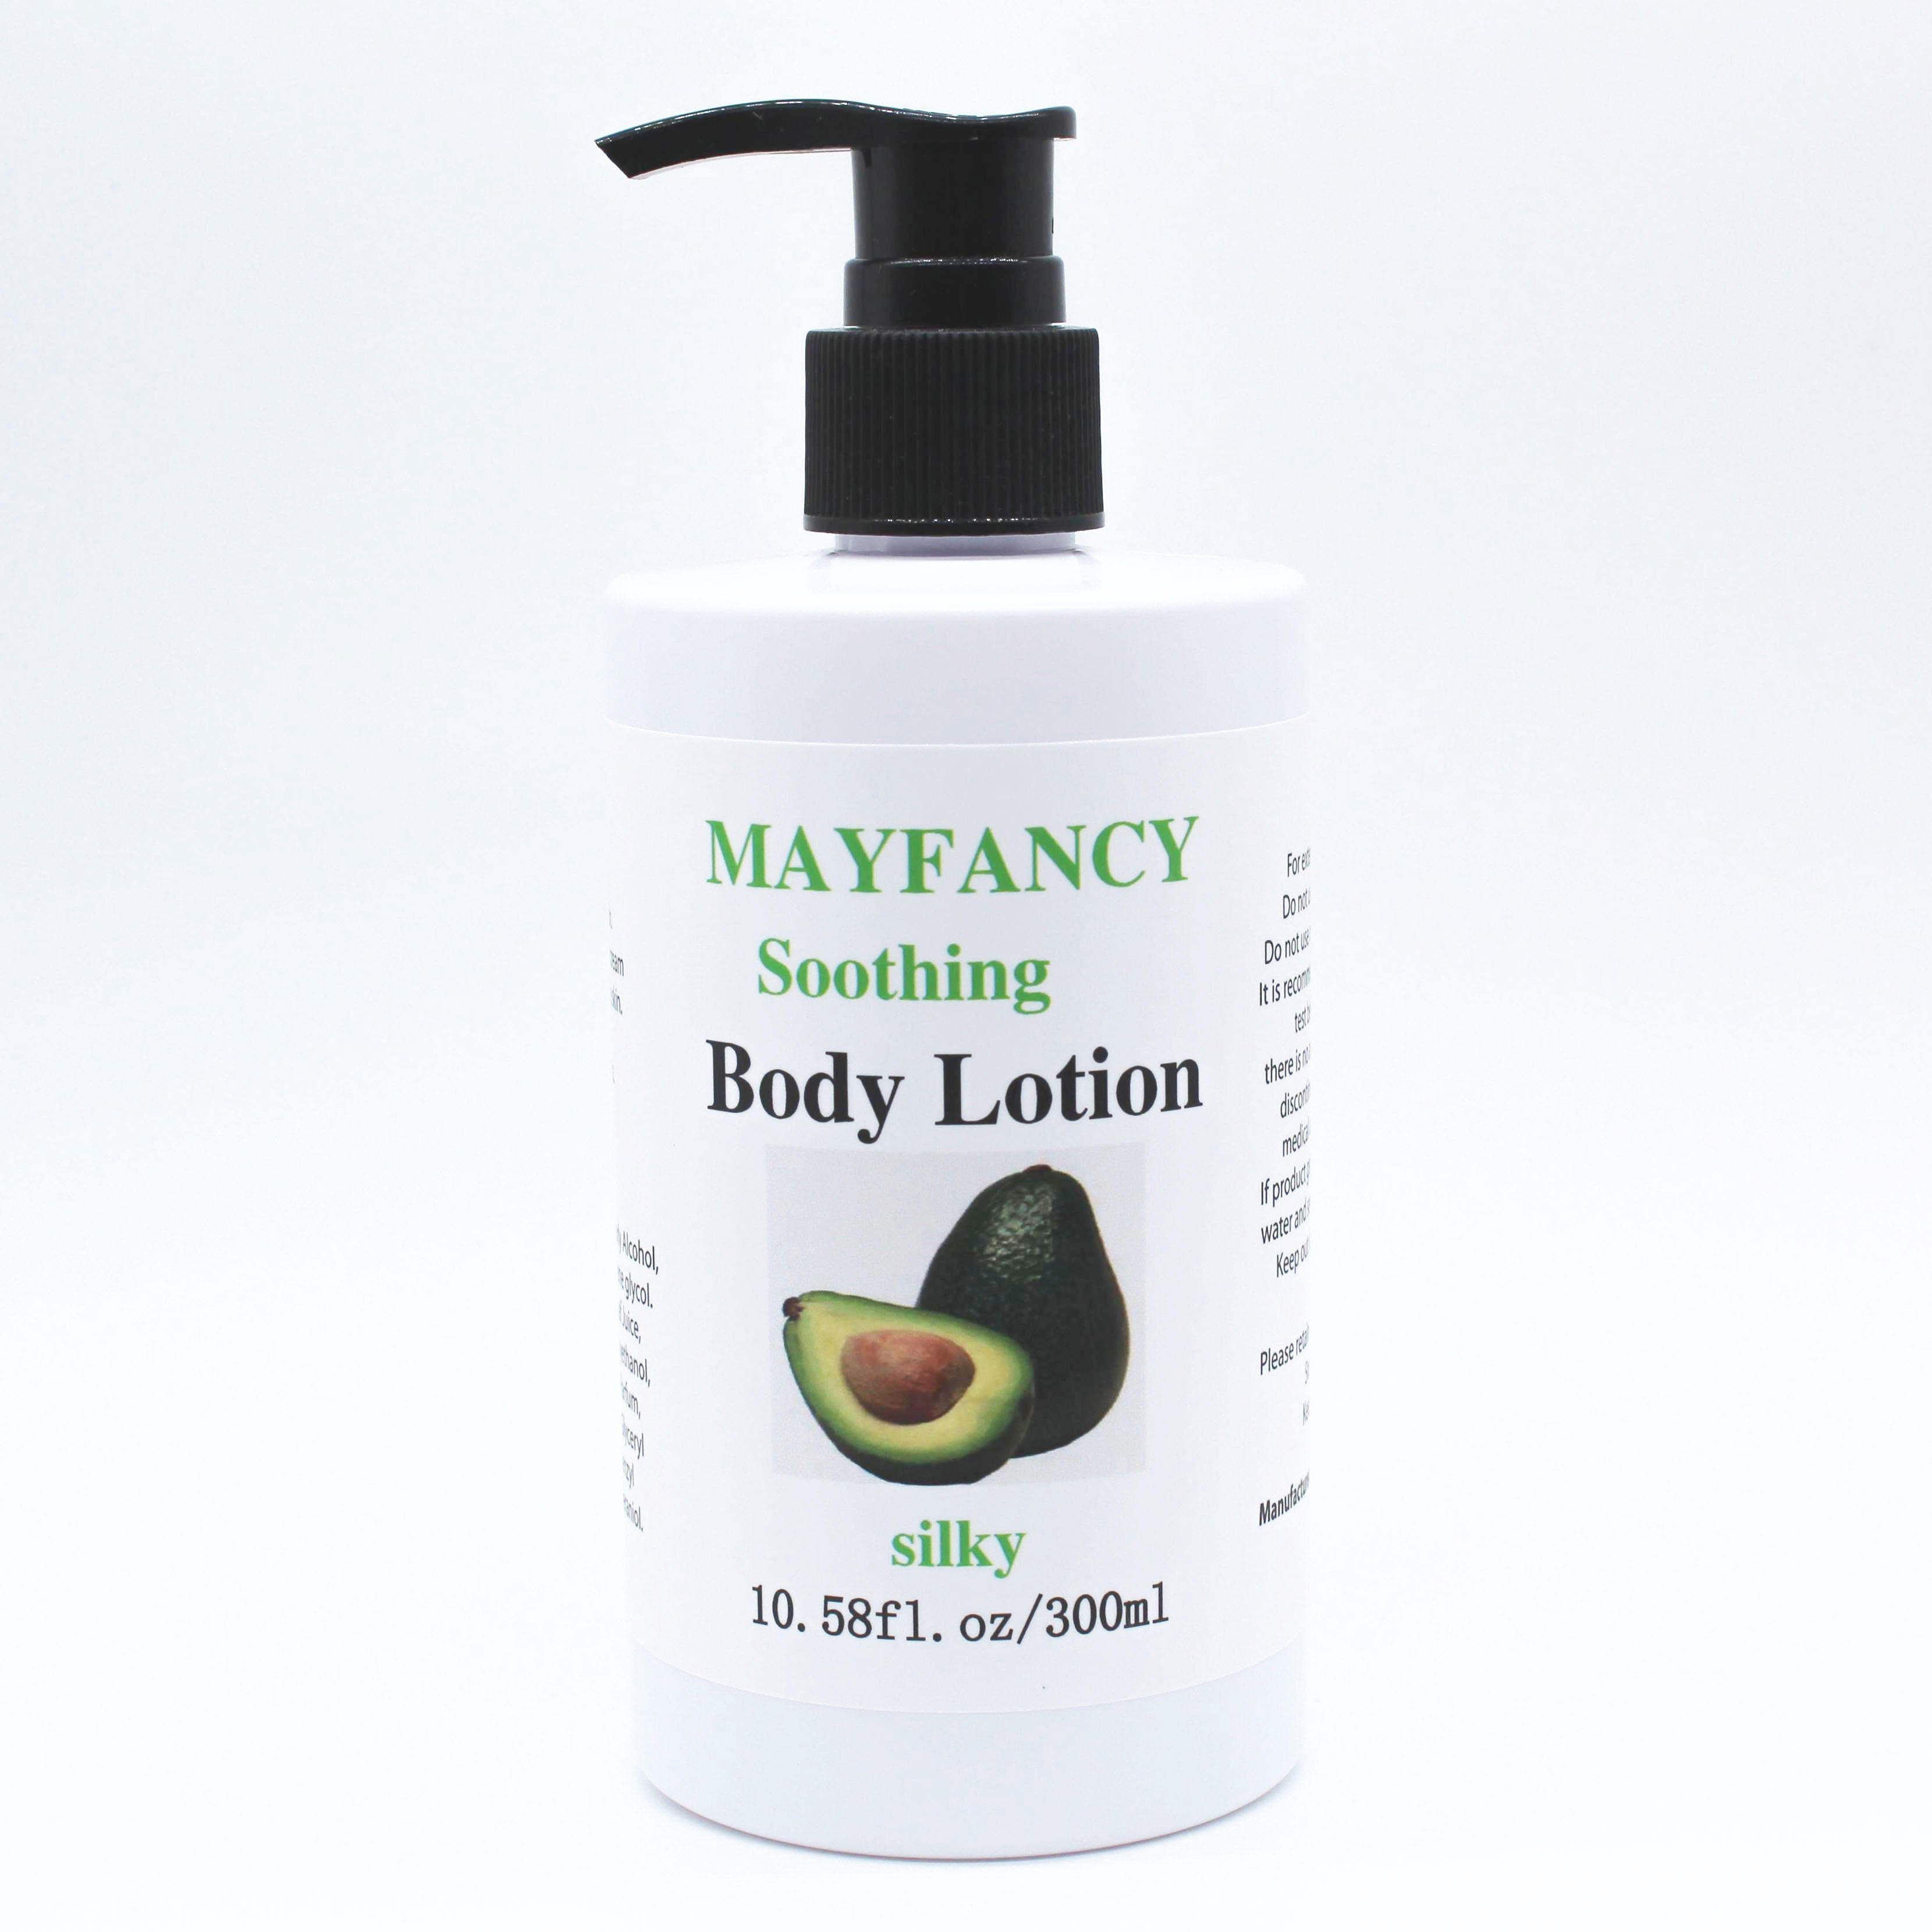 Mayfancy Soothing Avocado Body Lotion